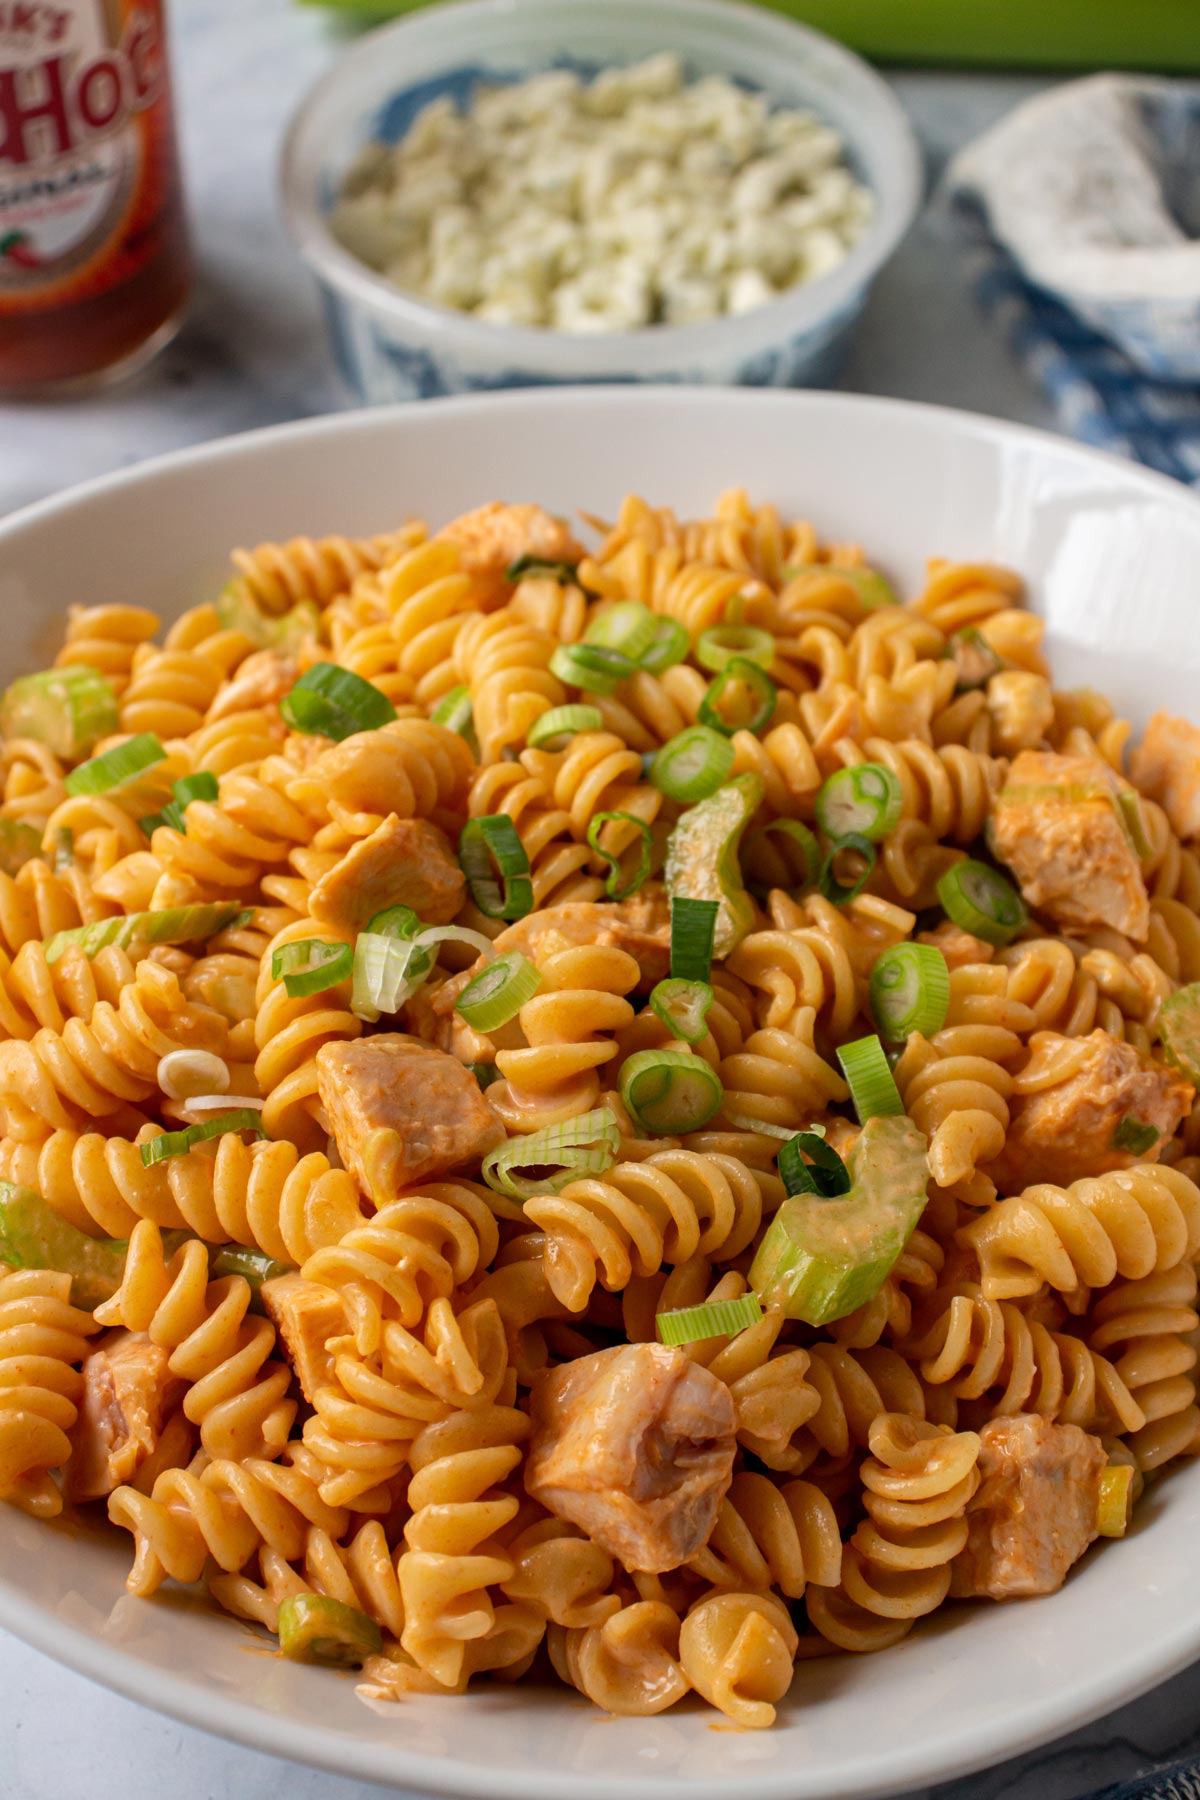 Pasta salad with Buffalo dressing, chicken, and celery in a white serving bowl.